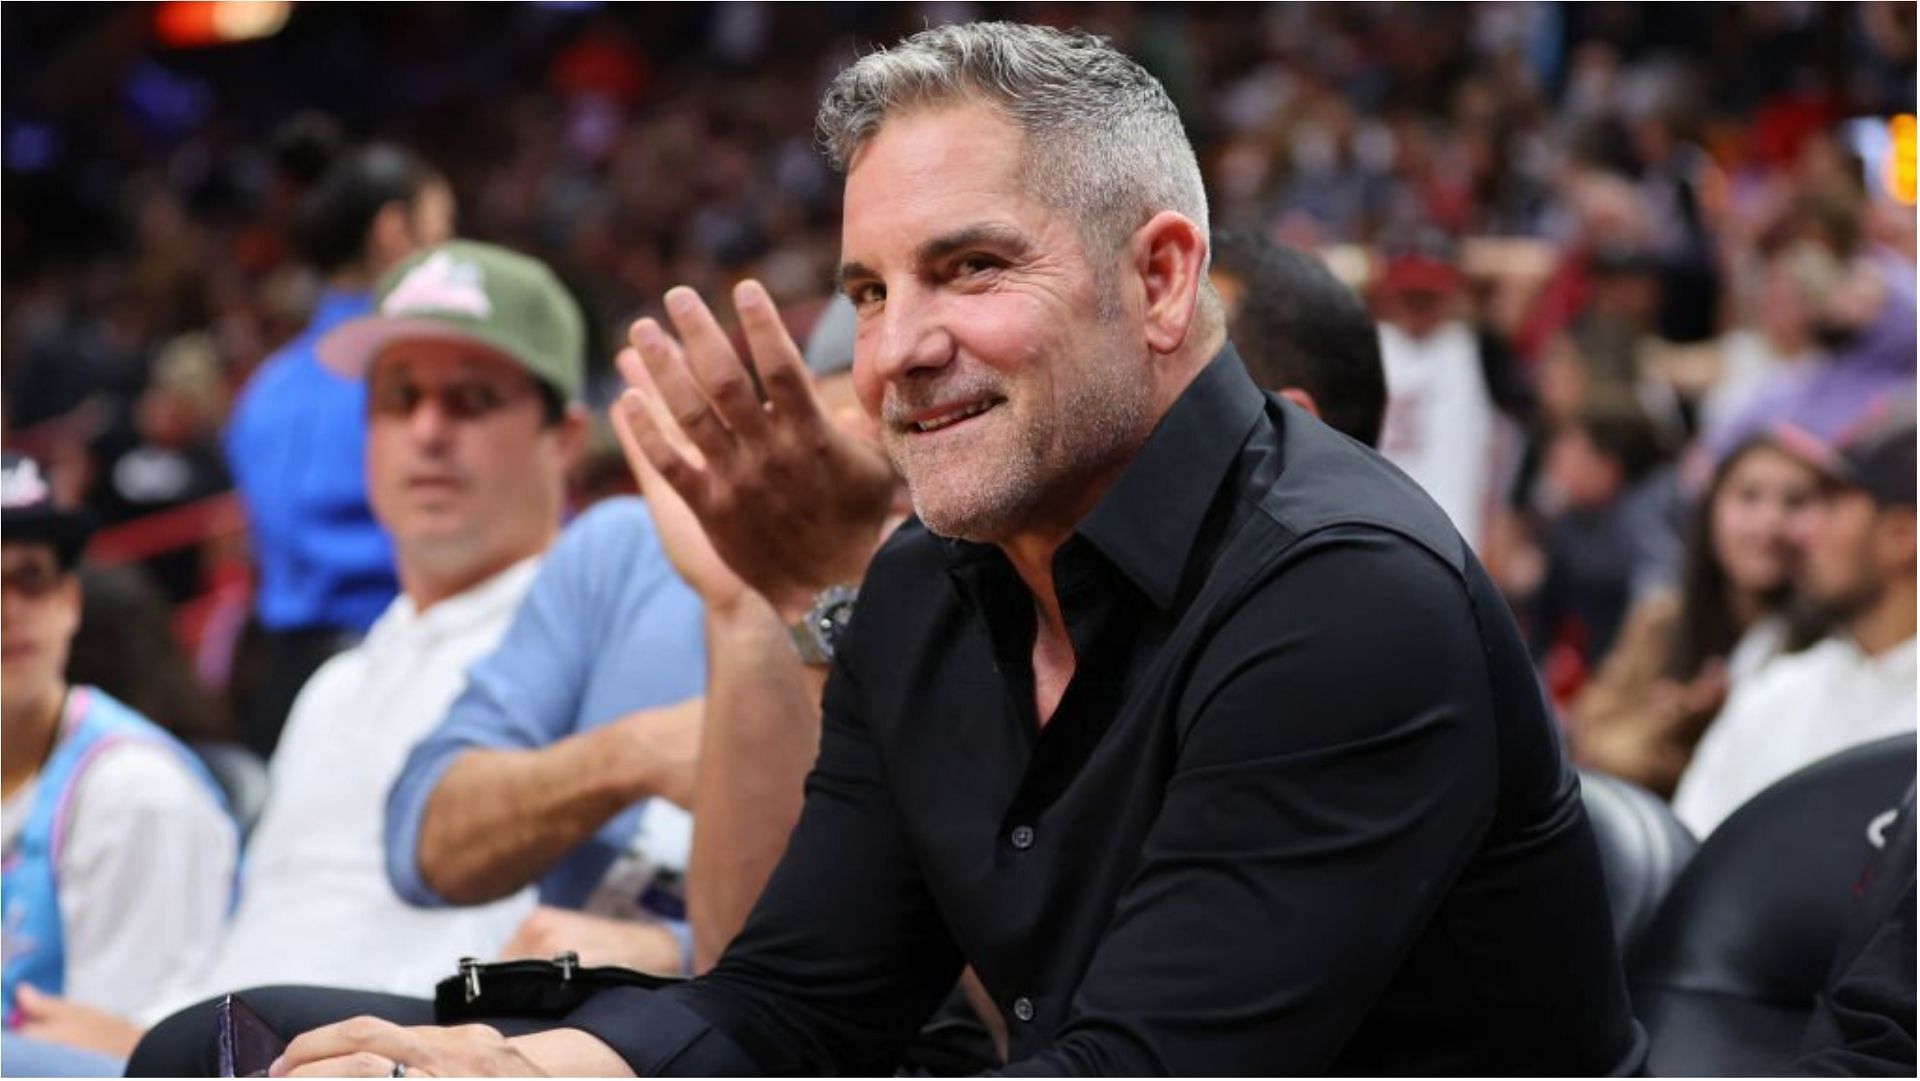 Grant Cardone said that it is impossible to survive with $400,000 a year (Image via Michael Reaves/Getty Images)